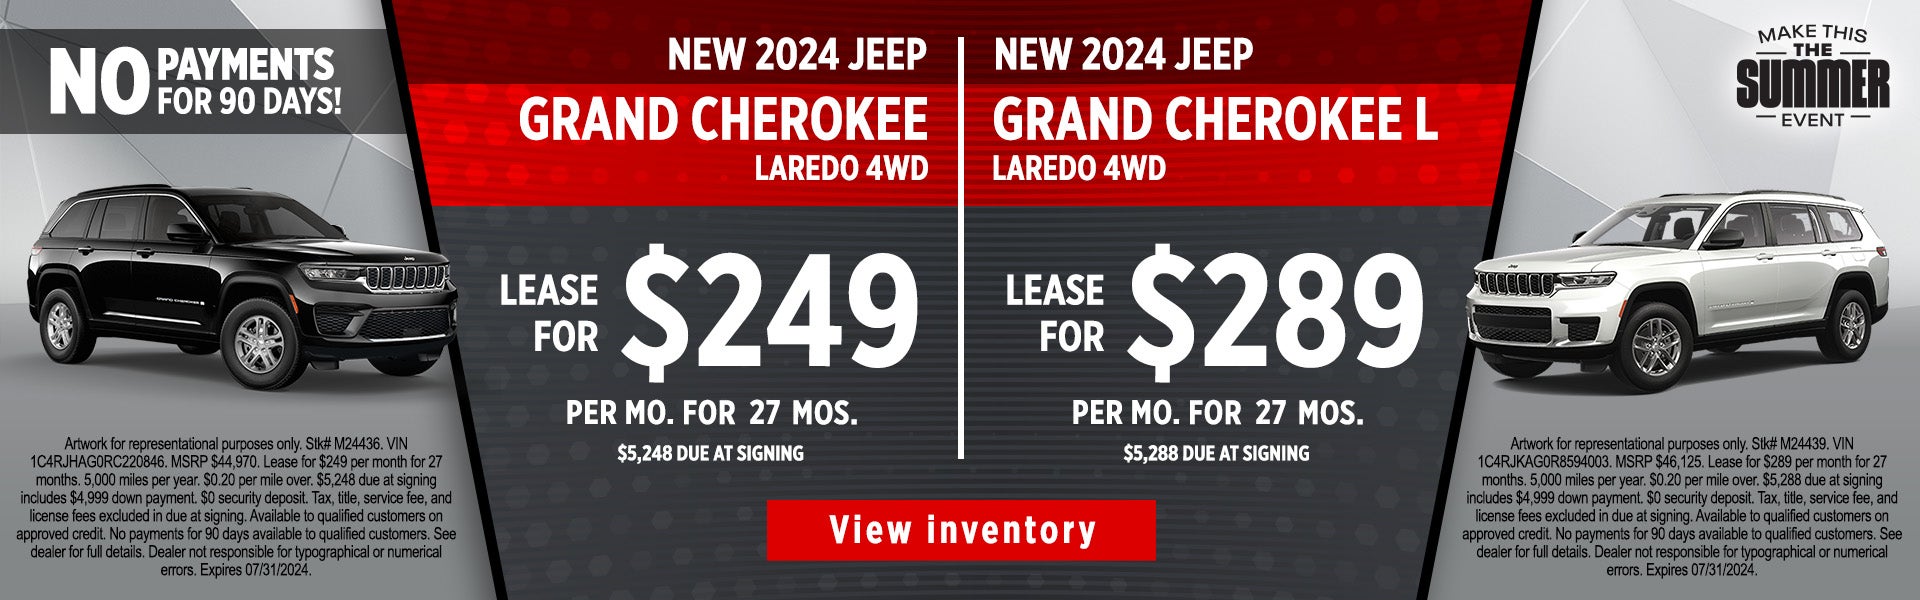 July Lease Special 2 - New 2024 Jeep Grand Cherokee